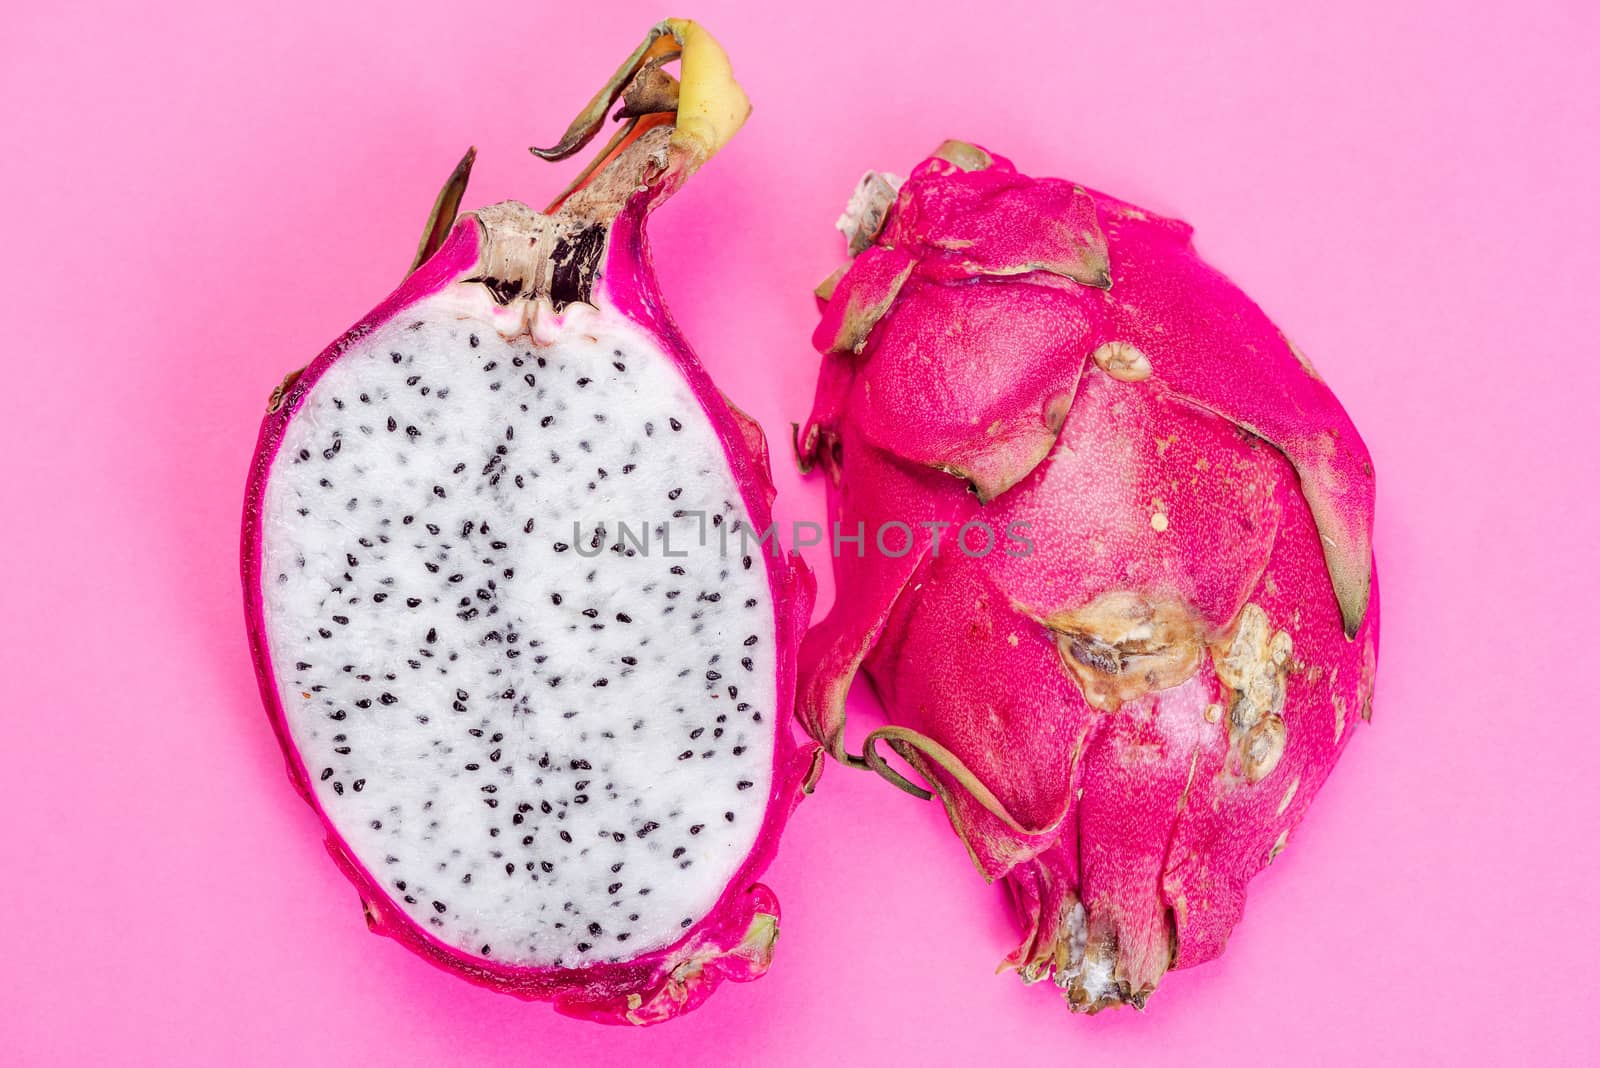 Pitahaya or Dragon Fruit Cut in Half on Pink Pastel Background. Flat Lay. Healthy Exotic Fruits.